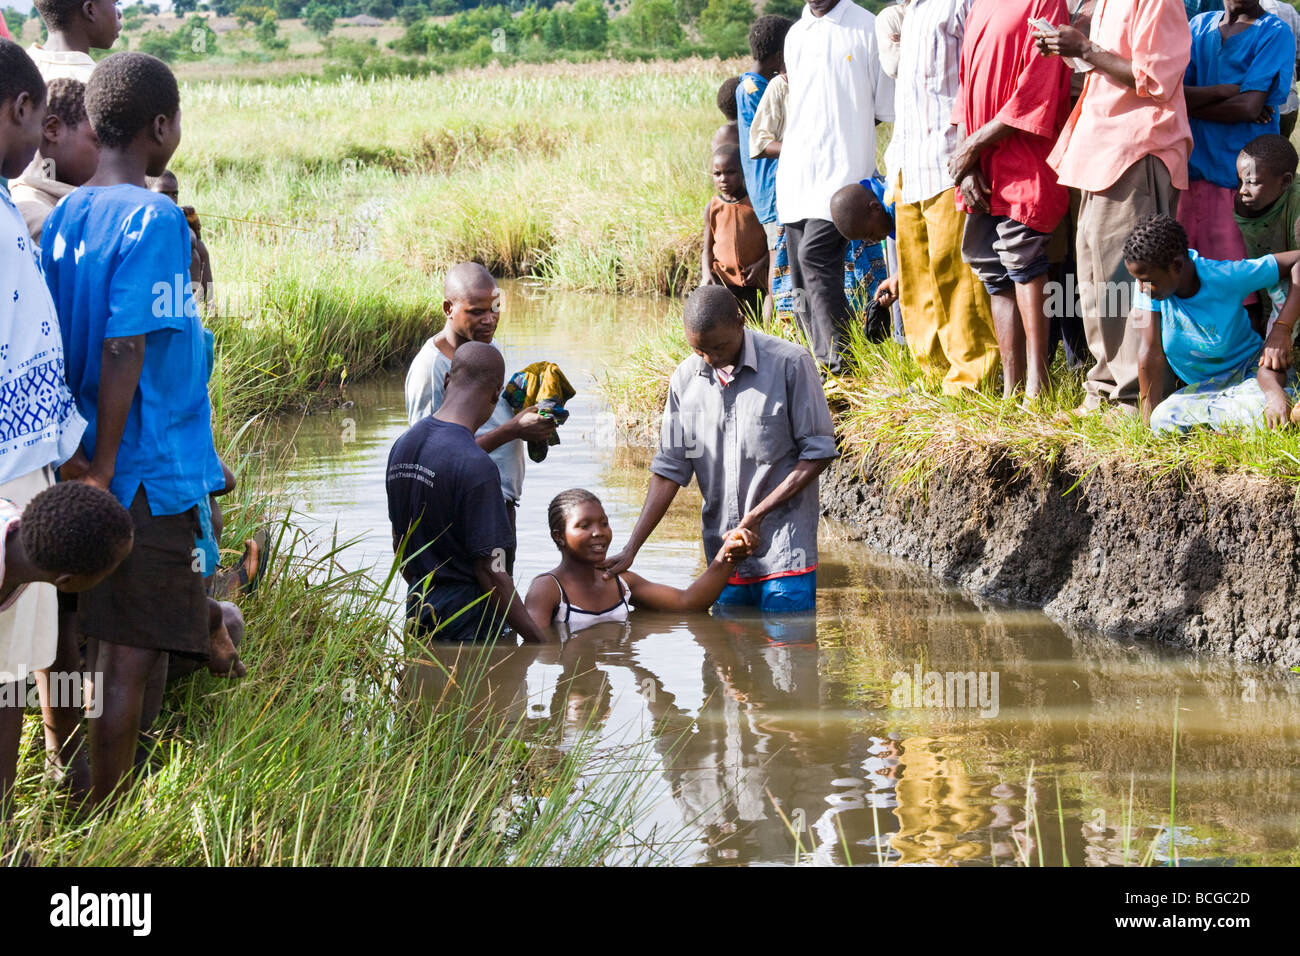 Adult Christian baptism by total immersion in a shallow river near the village of Nyombe, Malawi, Africa Stock Photo